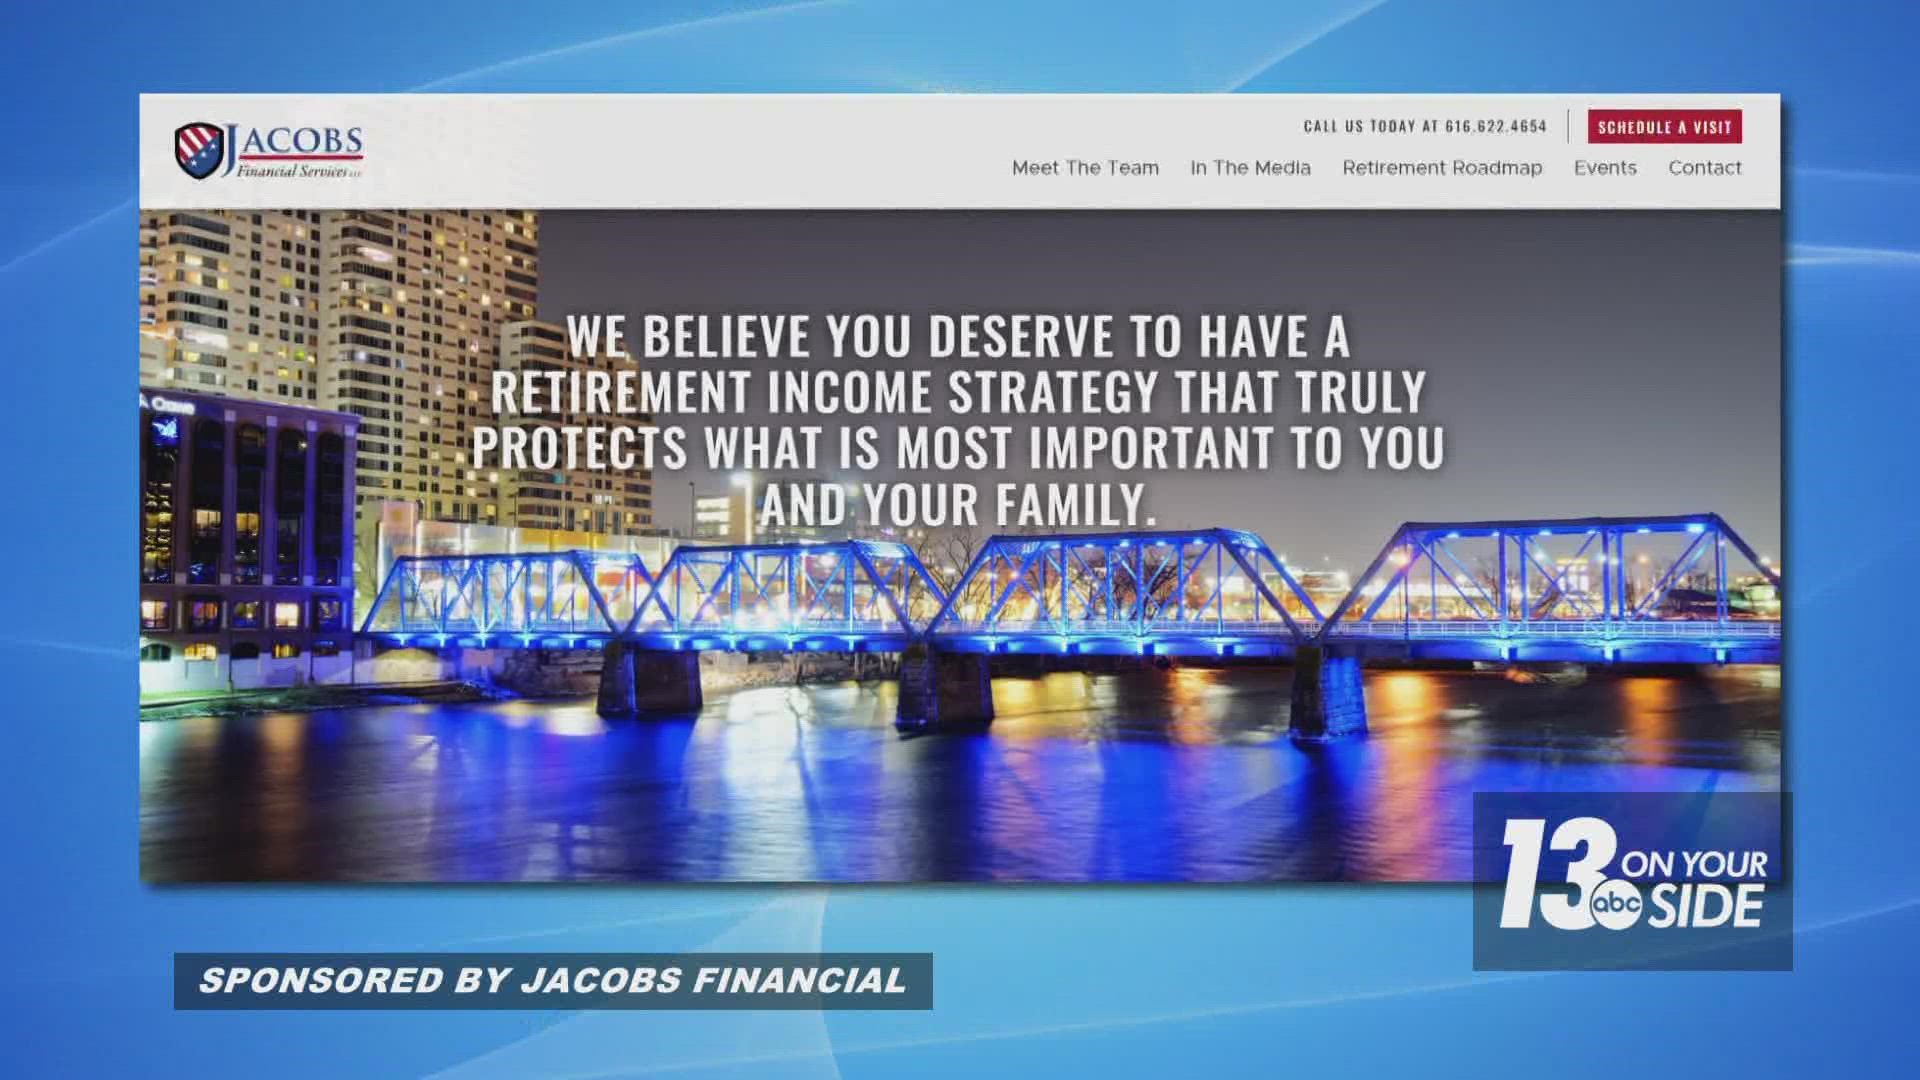 Tom Jacobs, from Jacobs Financial Services, can help you create a retirement income strategy.